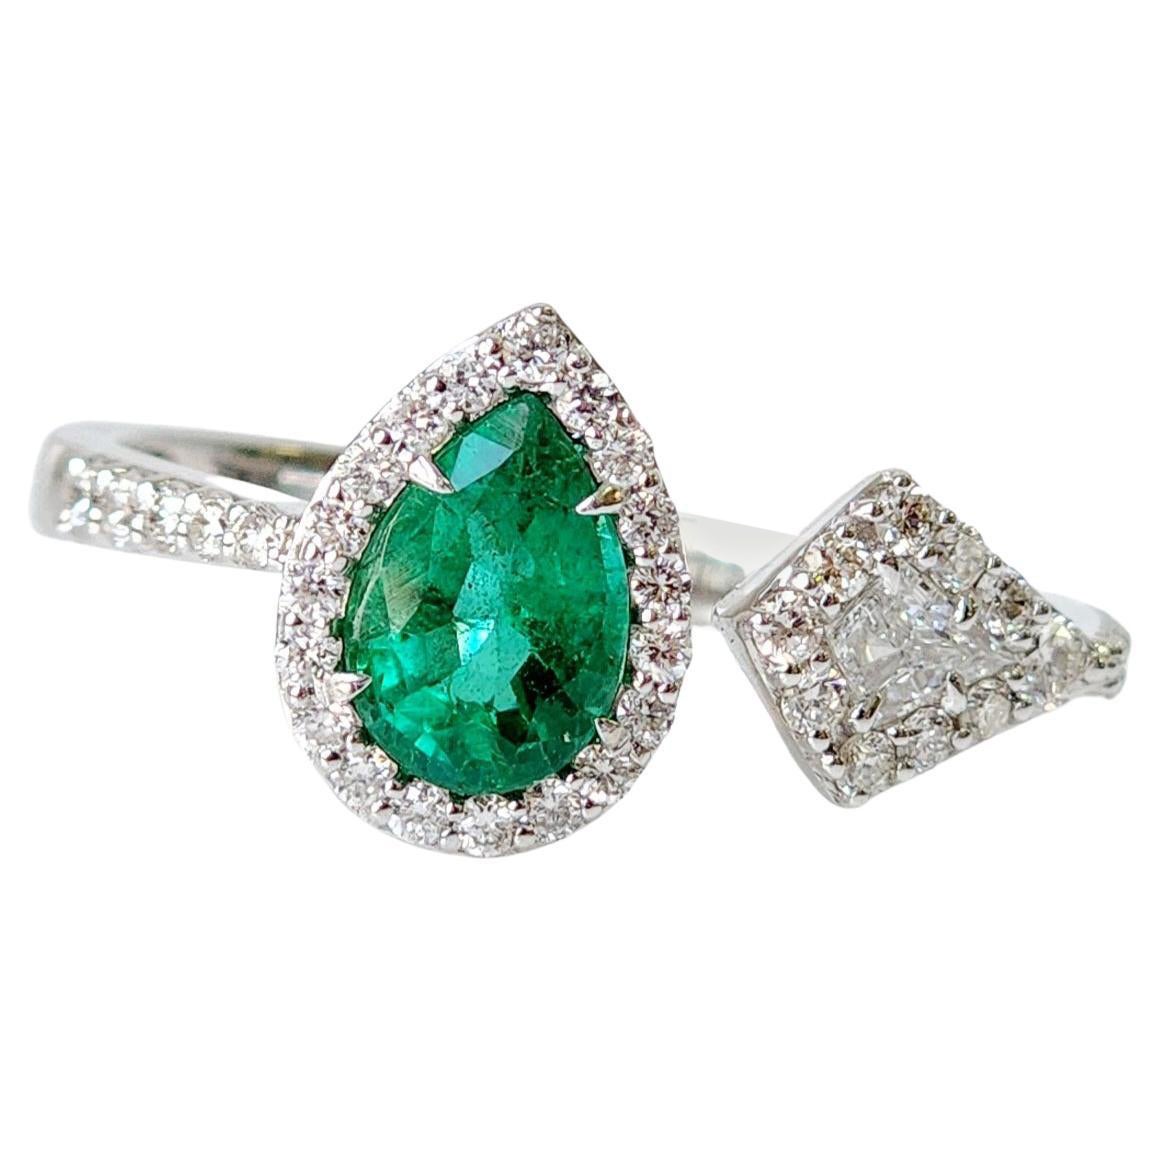 Exquisite Toi Et Moi Emerald and Kite Shaped Diamond Ring For Sale